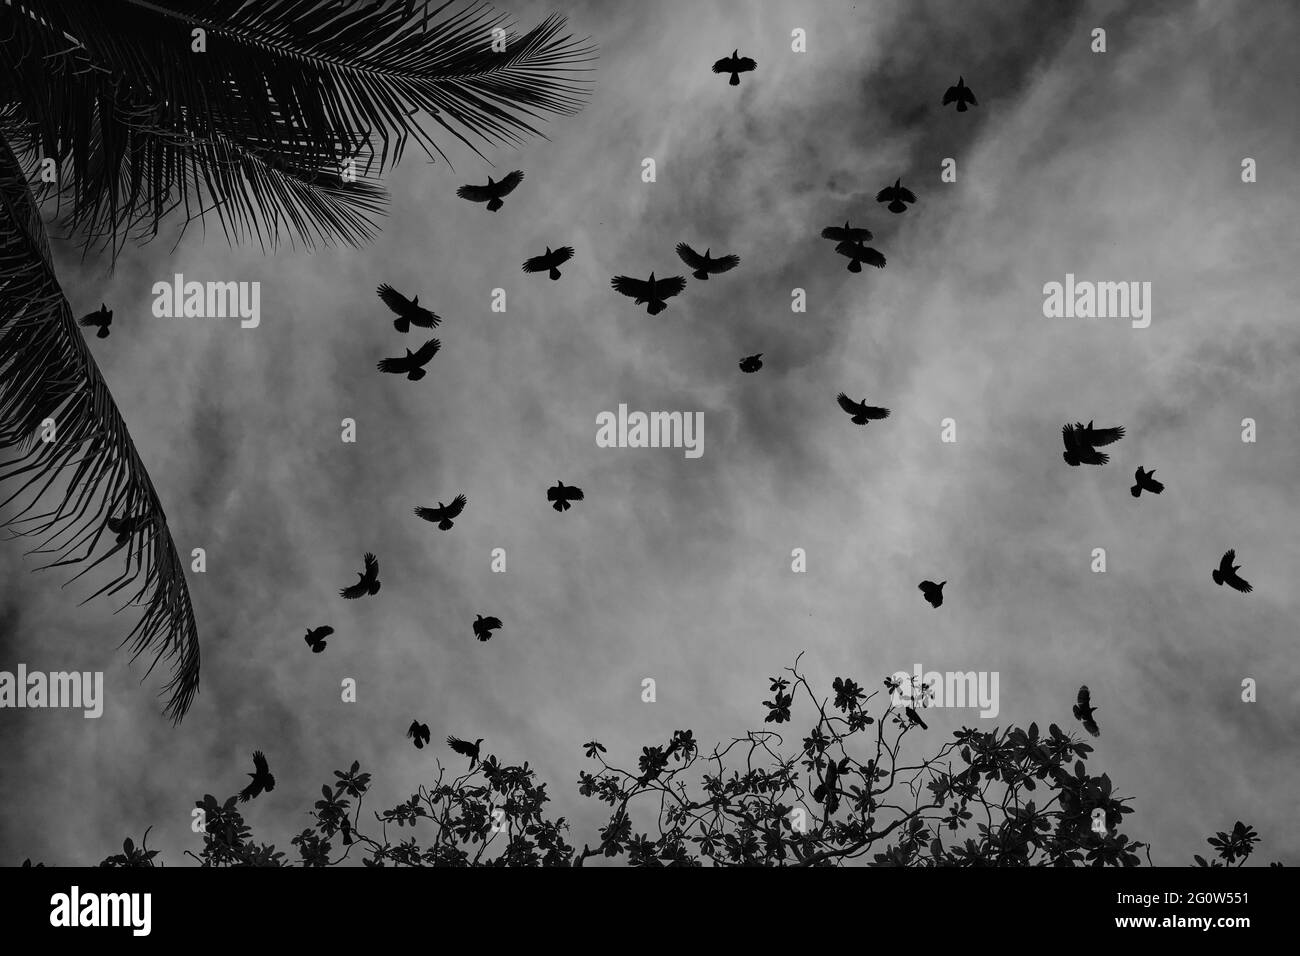 Silhouette of Crows in flight on a moody evening framed by trees in Penang, Malaysia. Birds in flight. Black and white photograph Stock Photo